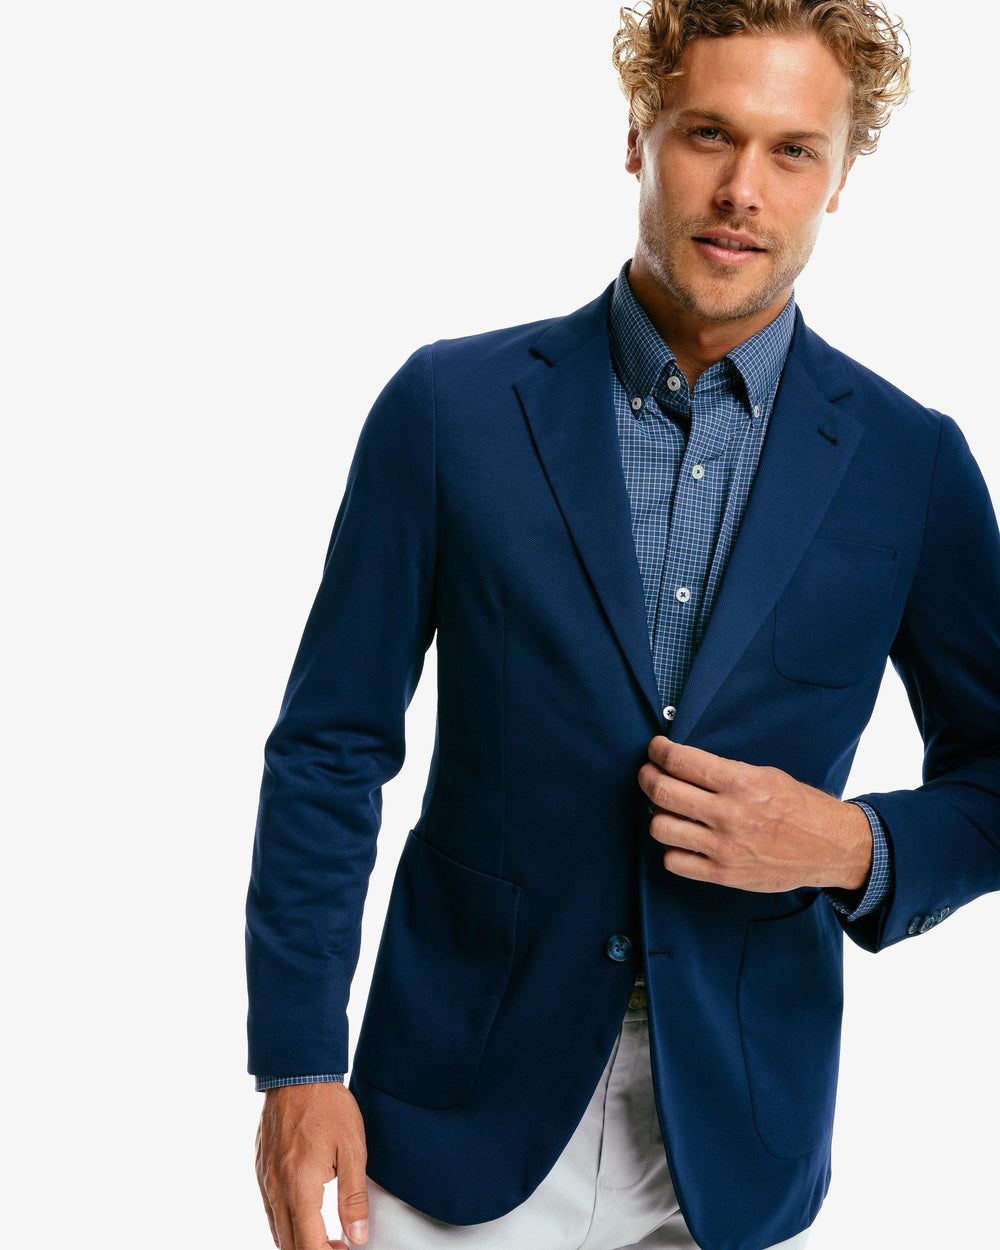 The front of the Men's Charleston Navy Blazer by Southern Tide - Navy